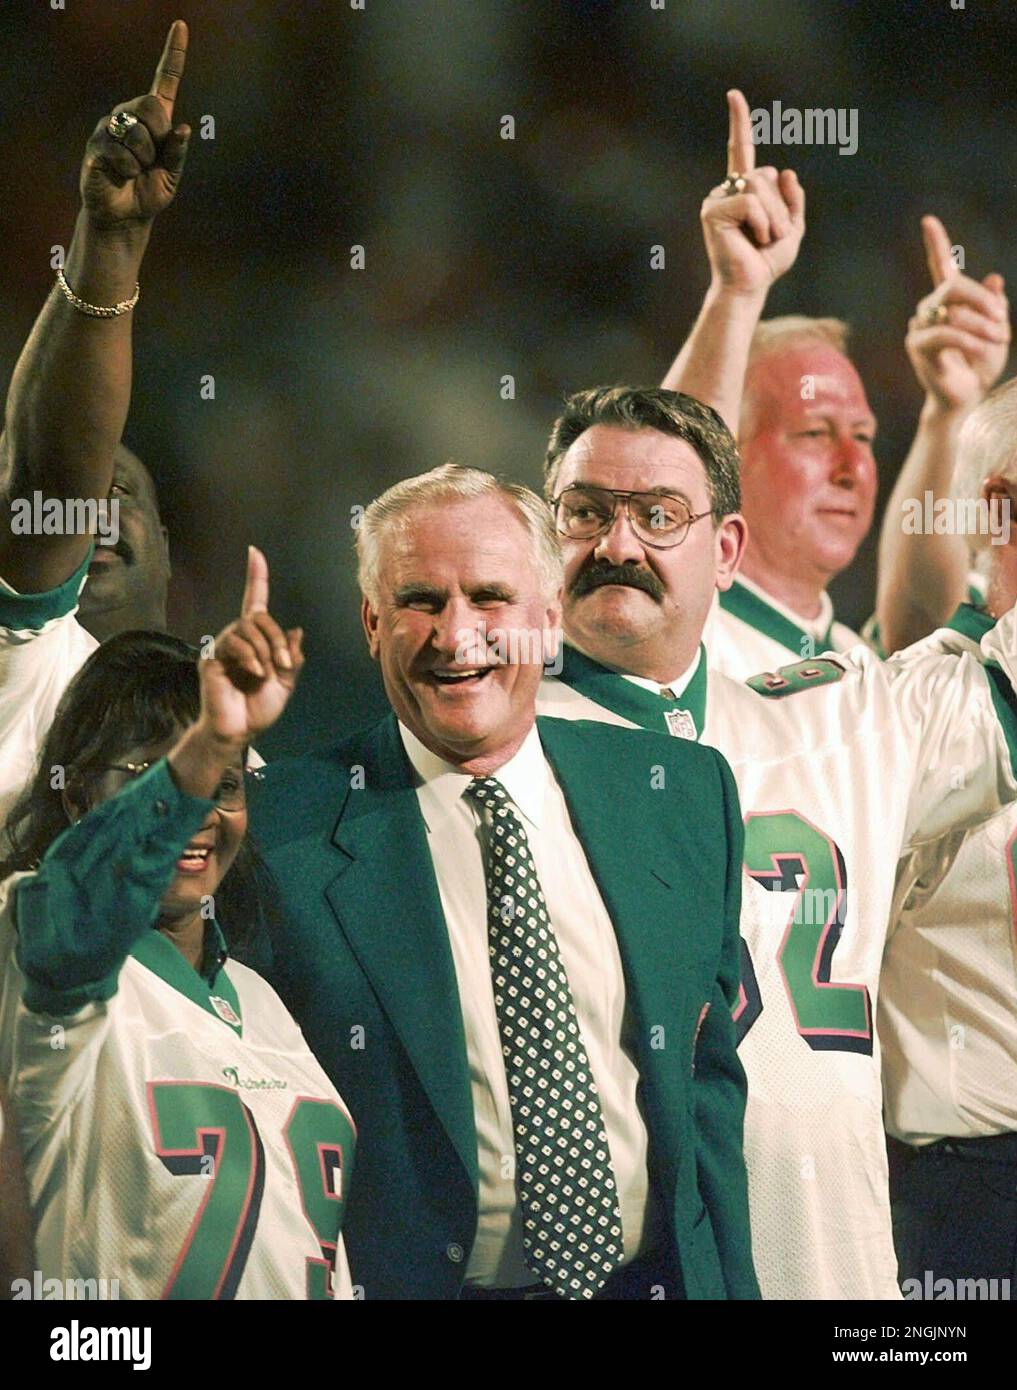 Former Miami Dolphins head coach Don Shula celebrates with